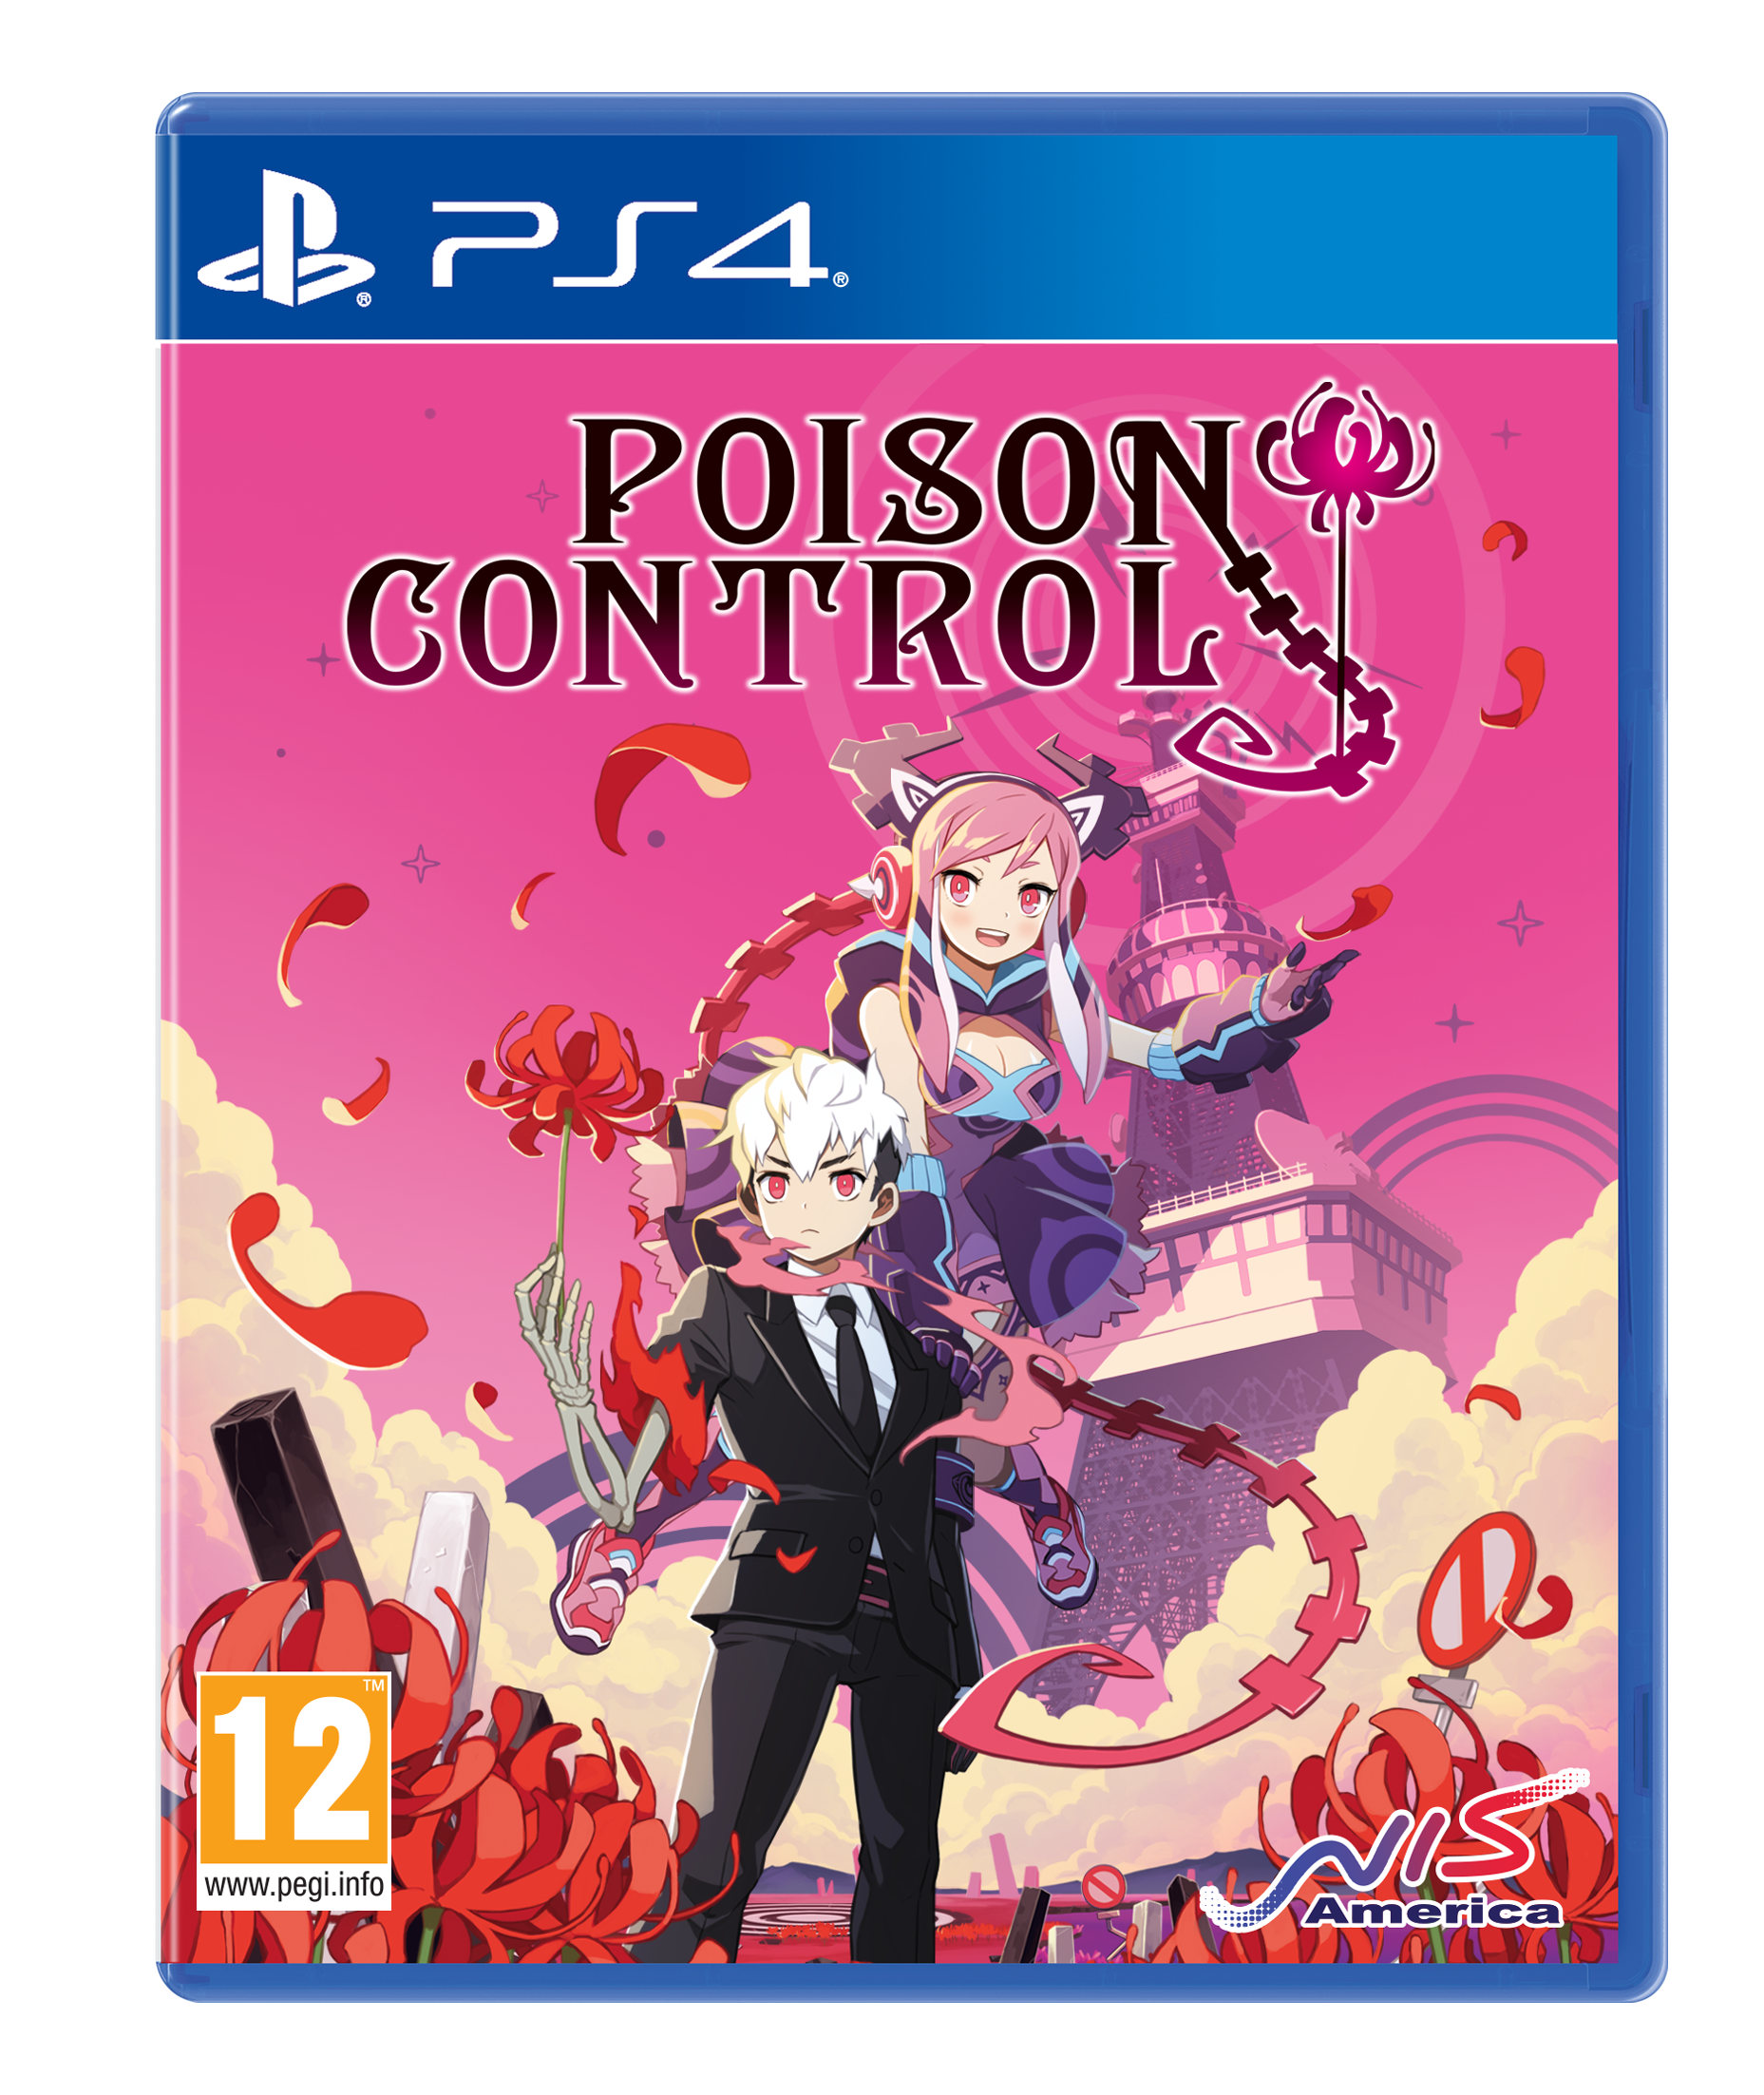 control standard edition ps4